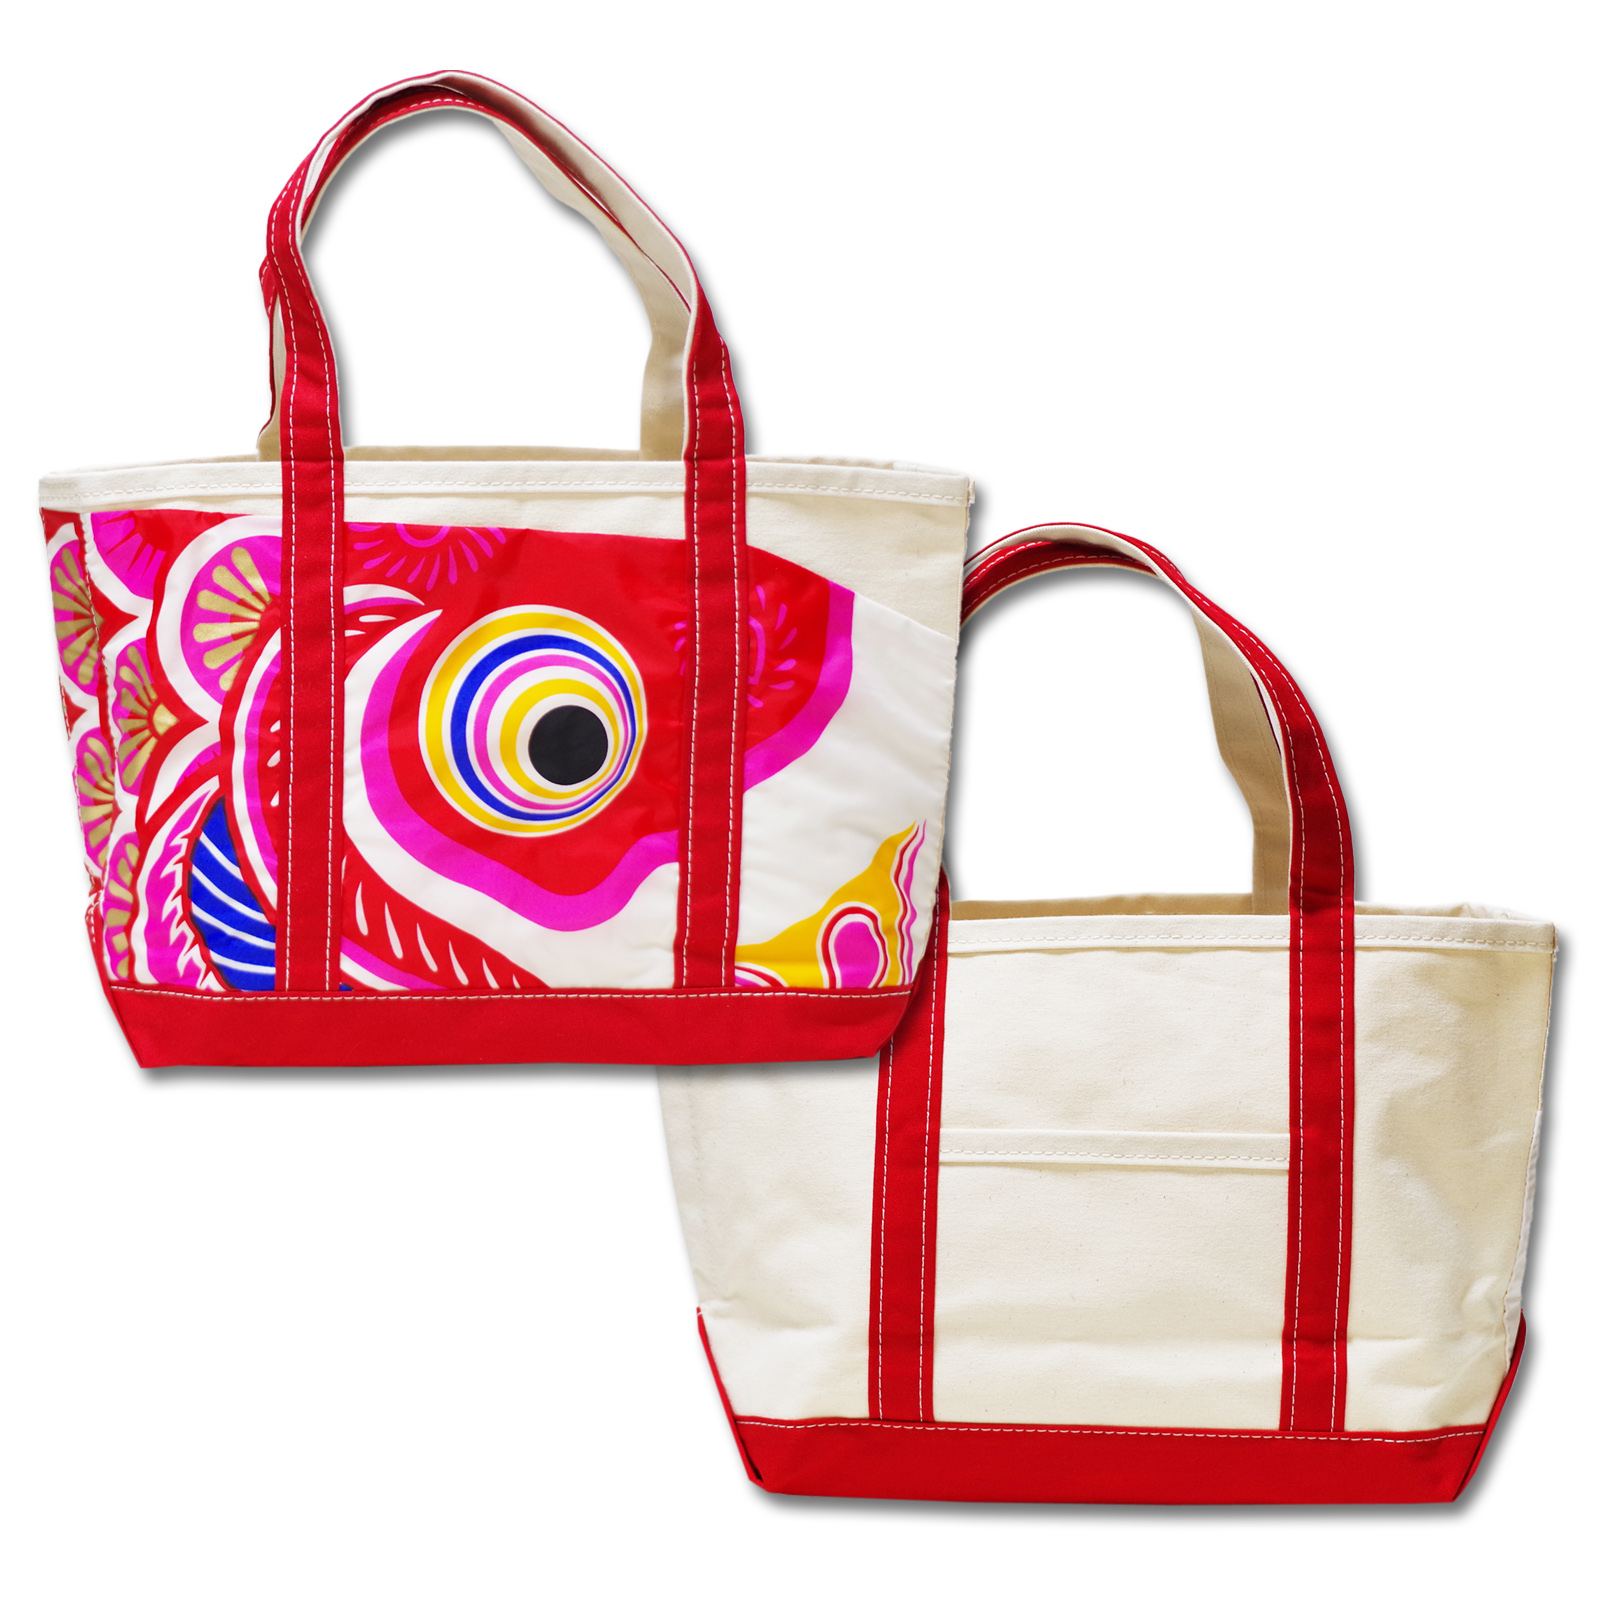 Tote Bag Red Large Size Right Facing